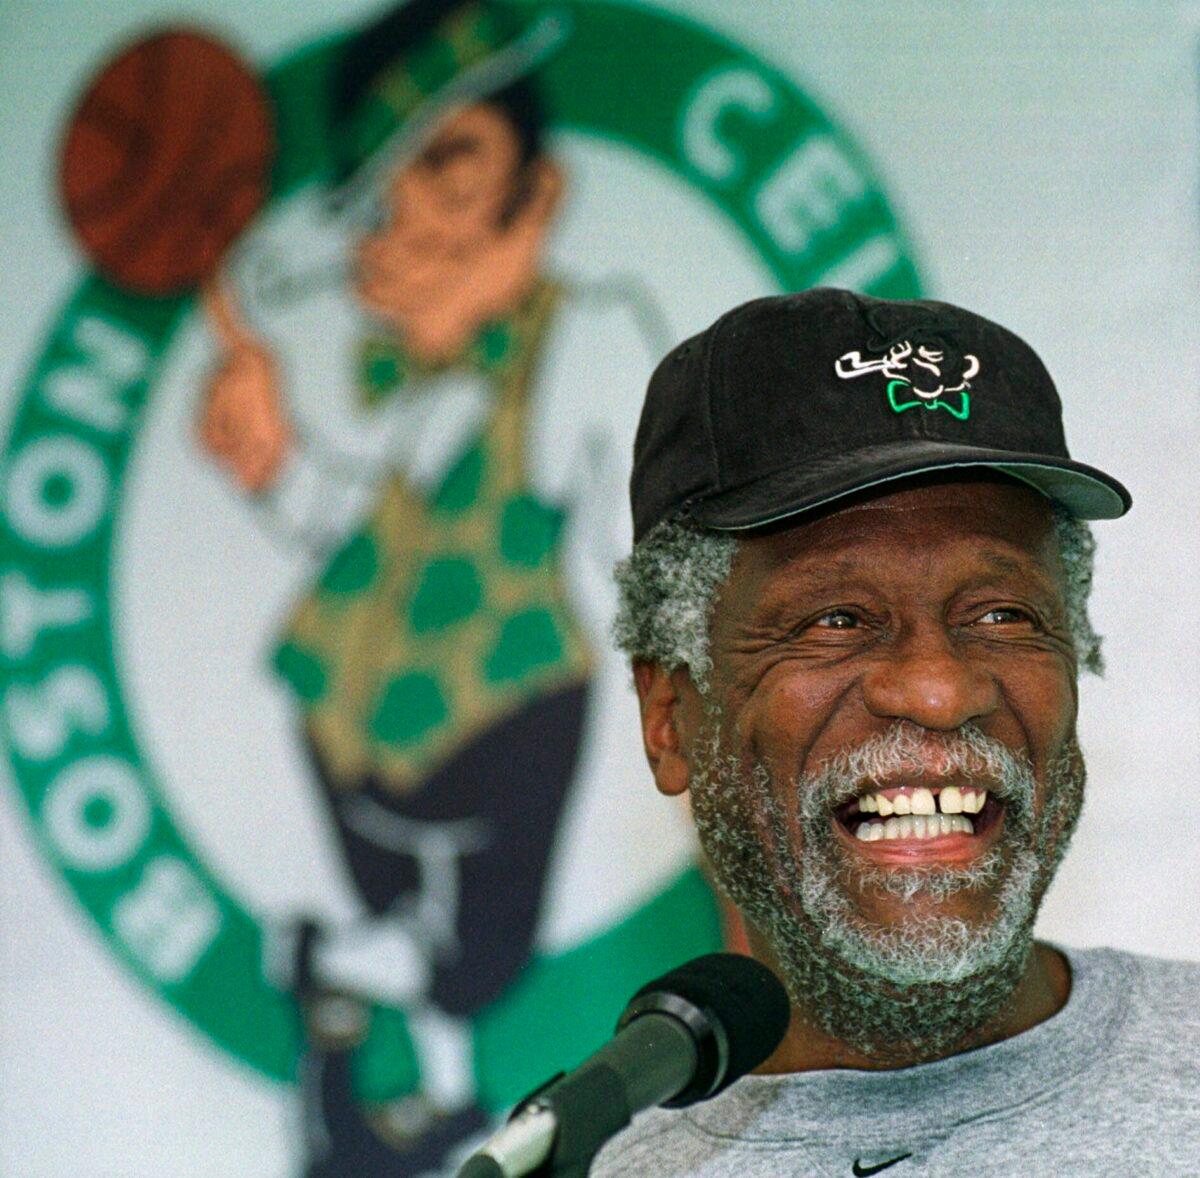 Boston Celtics legendary center Bill Russell has a light moment while answering questions from members of the media after a Celtics team practice in Waltham, Mass., on Oct. 11, 1999. (Angela Rowlings/AP Photo)